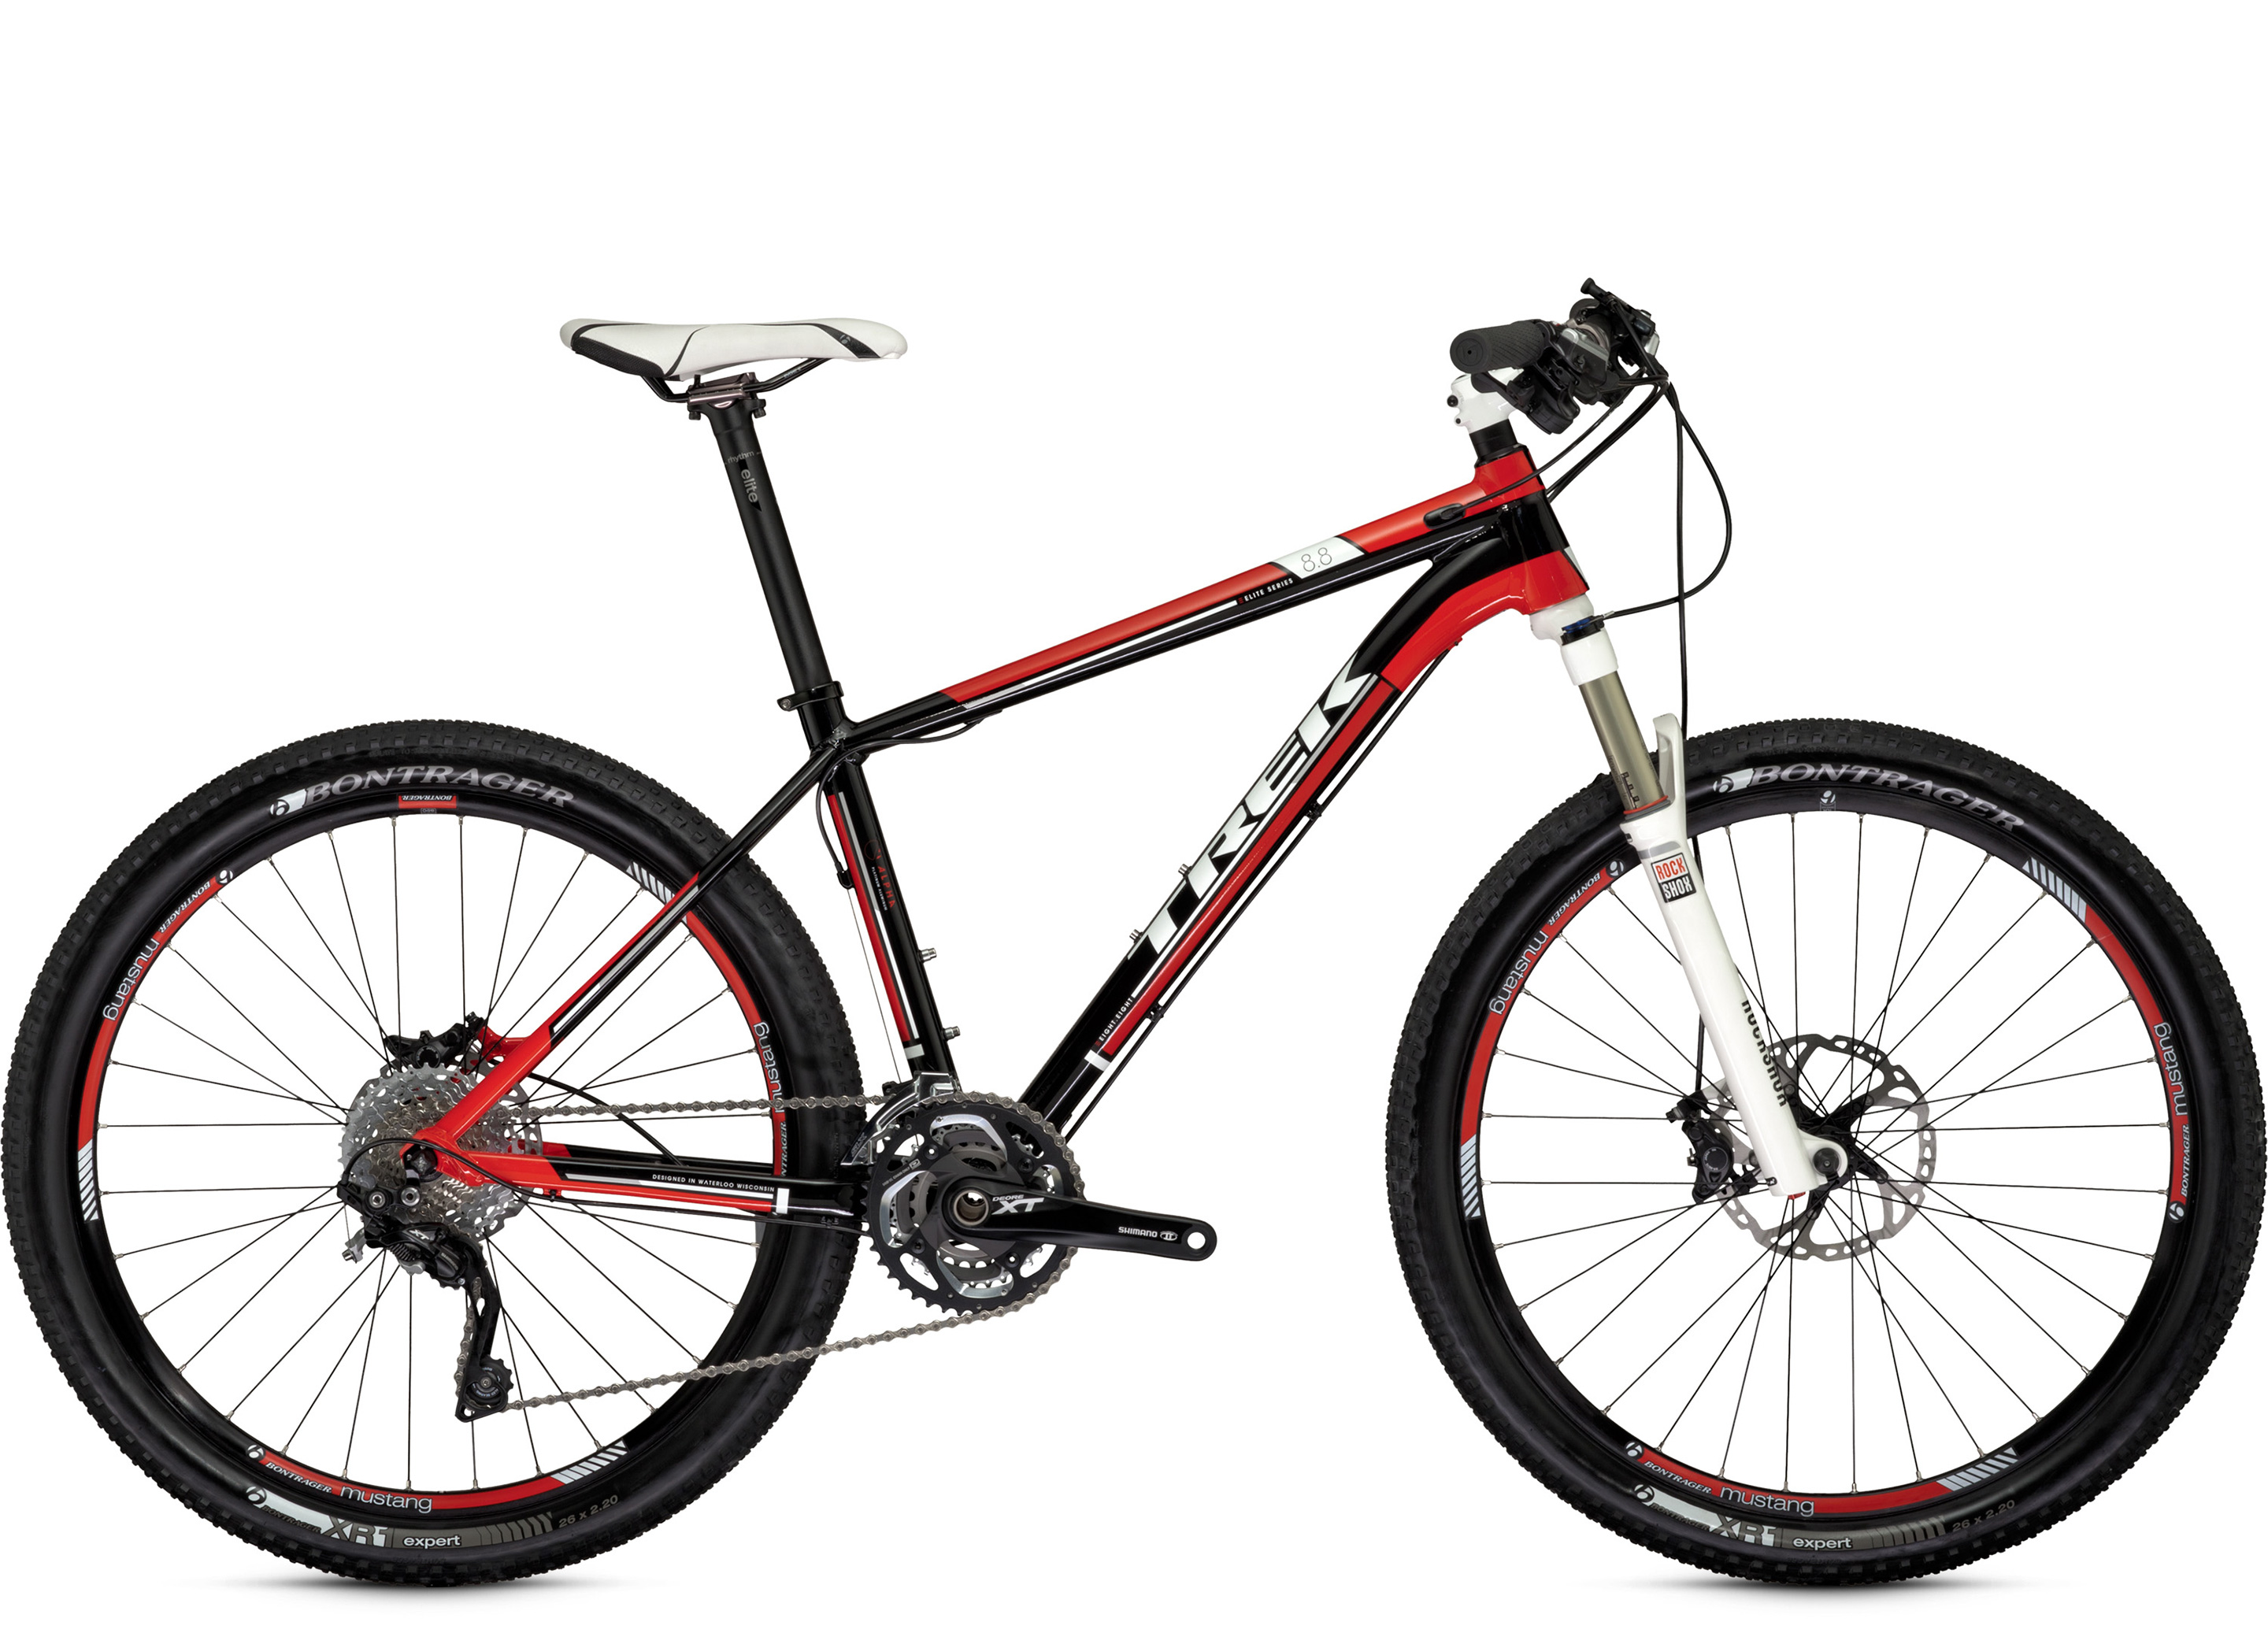 2013 Elite 8.8 | Bouticycle